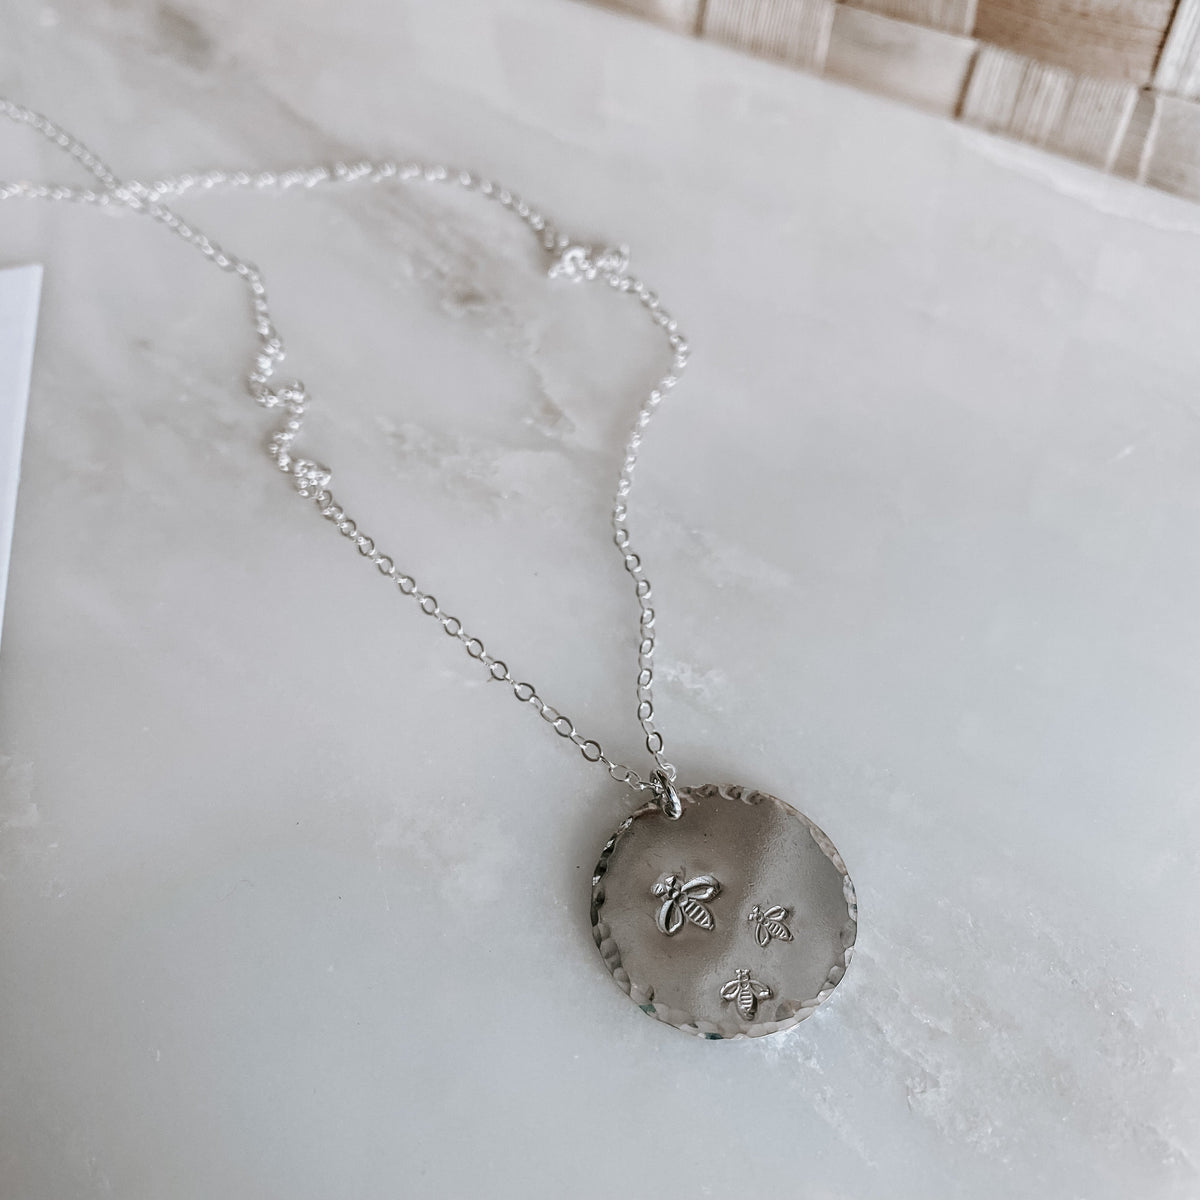 Hand Stamped Bee Coin Necklace (WS)